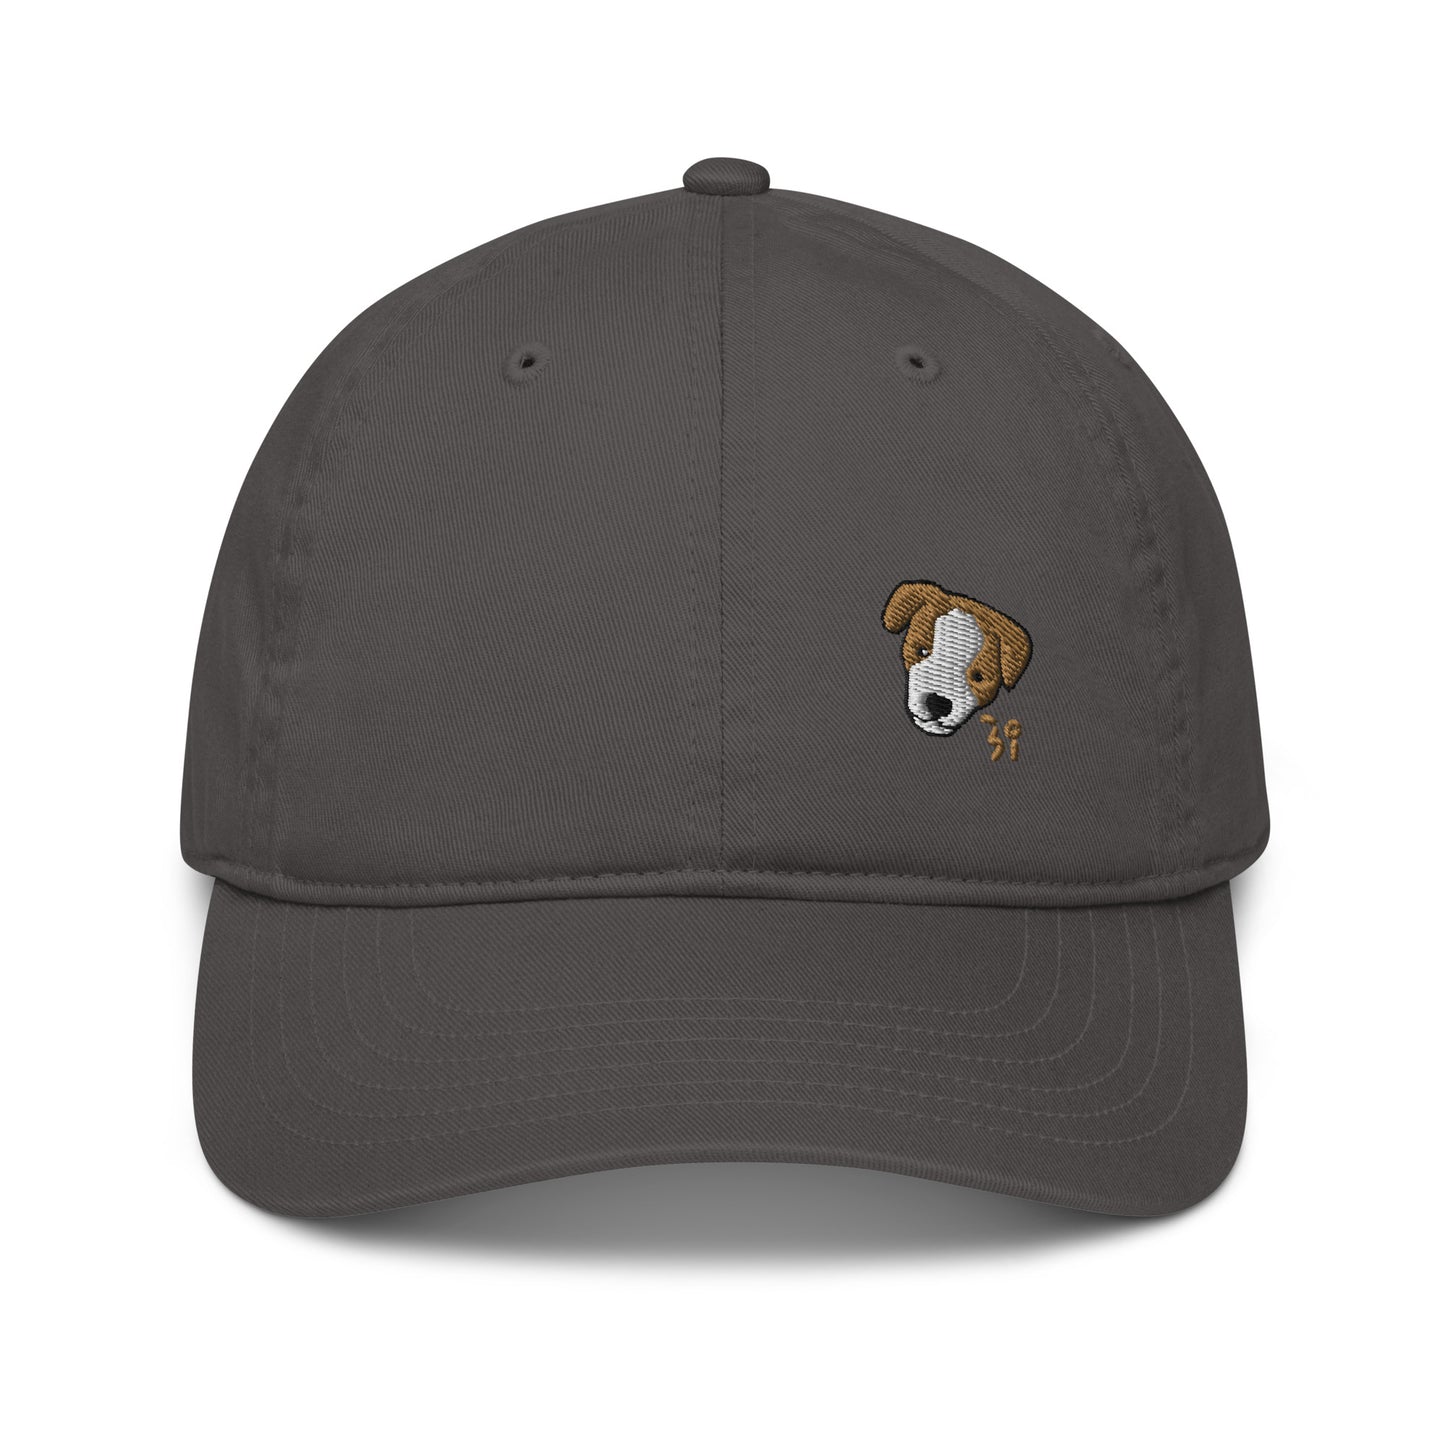 Jack Russell Terrier Organic dad hat